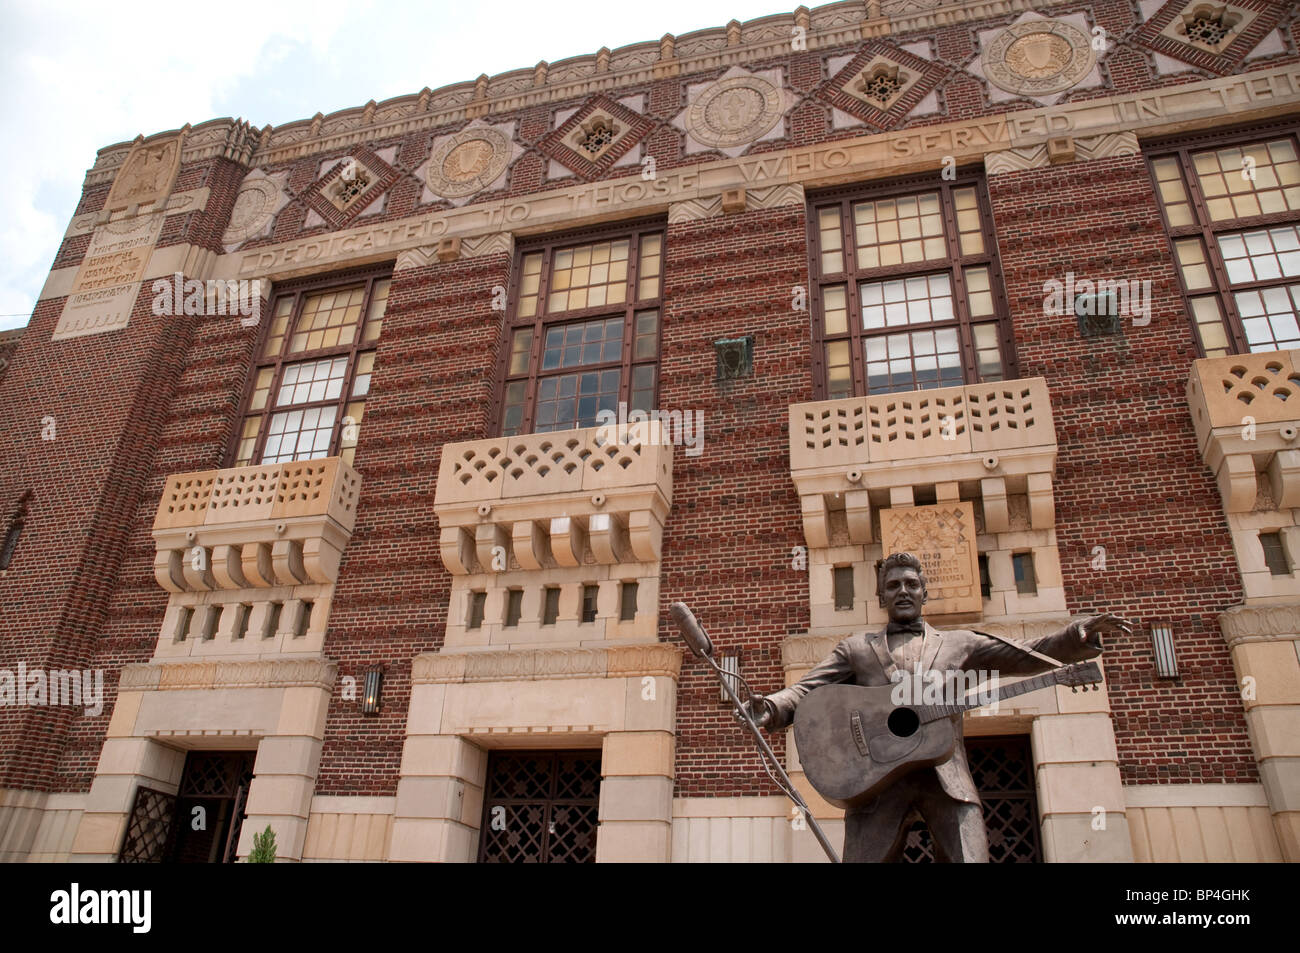 A bronze statue of Elvis Presley performing with a guitar outside the Shreveport Municipal Auditorium, in Shreveport, Louisiana, United States. Stock Photo